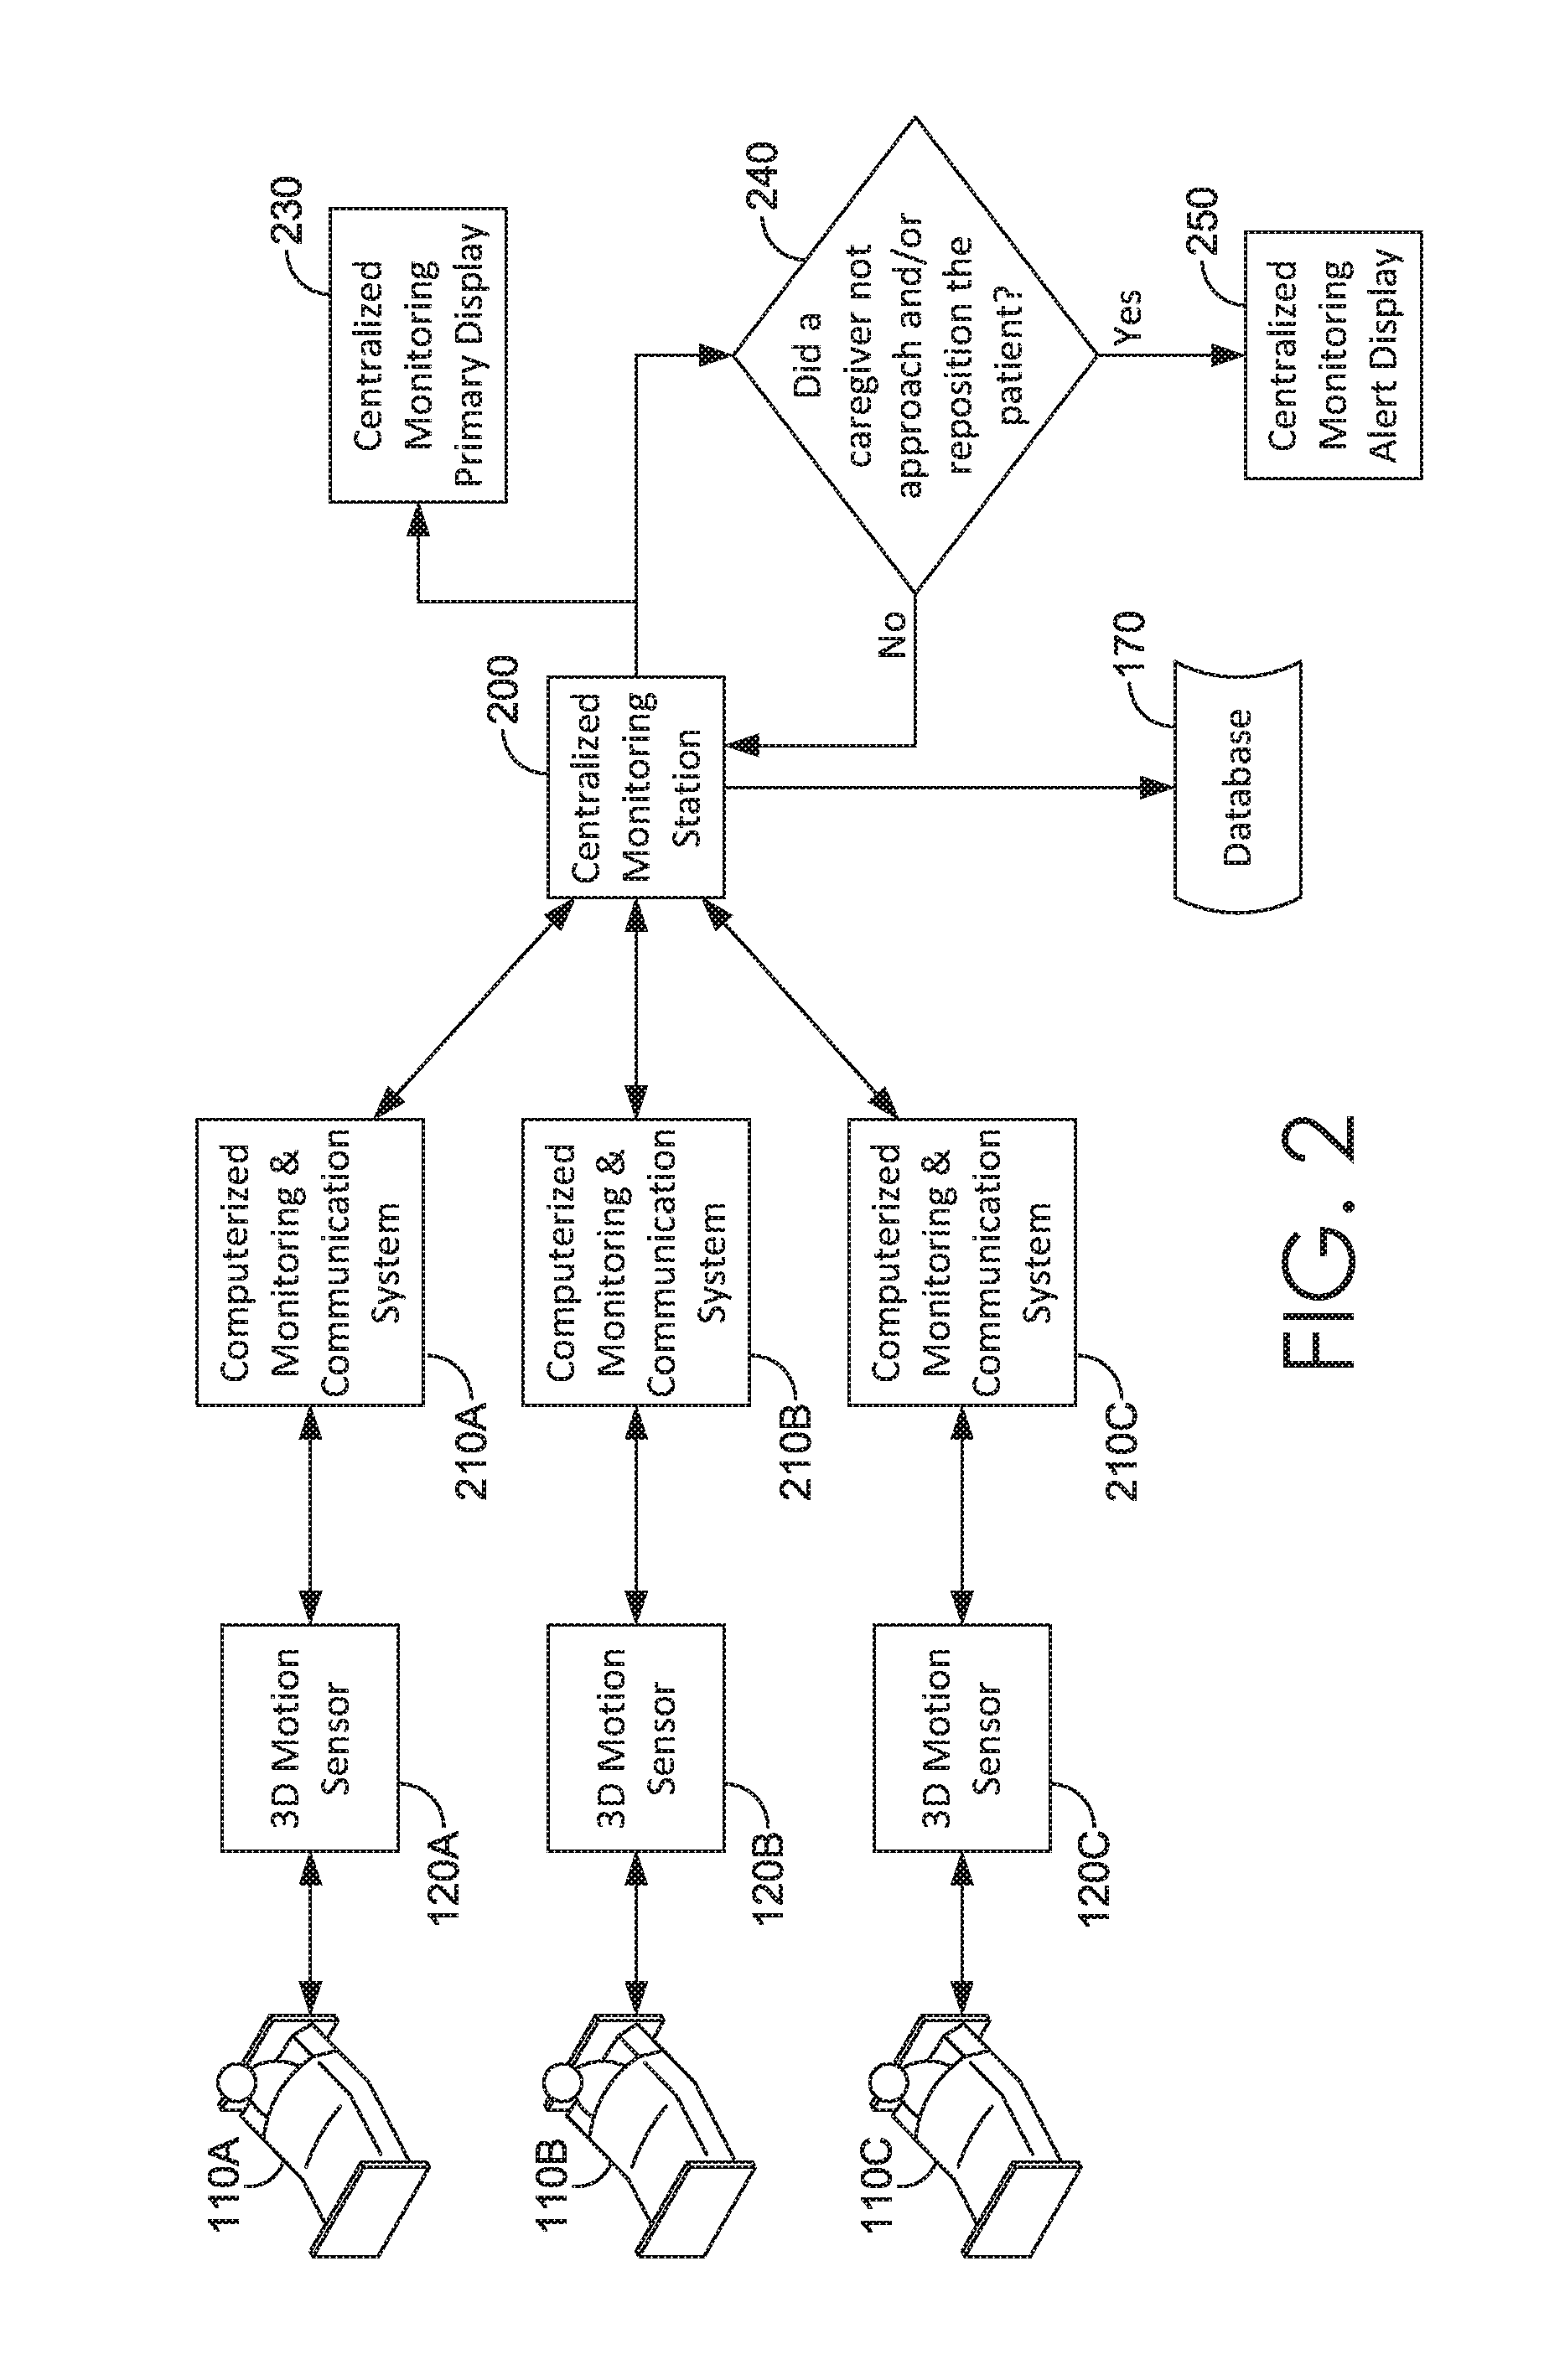 Method and system for determining whether a caretaker takes appropriate measures to prevent patient bedsores